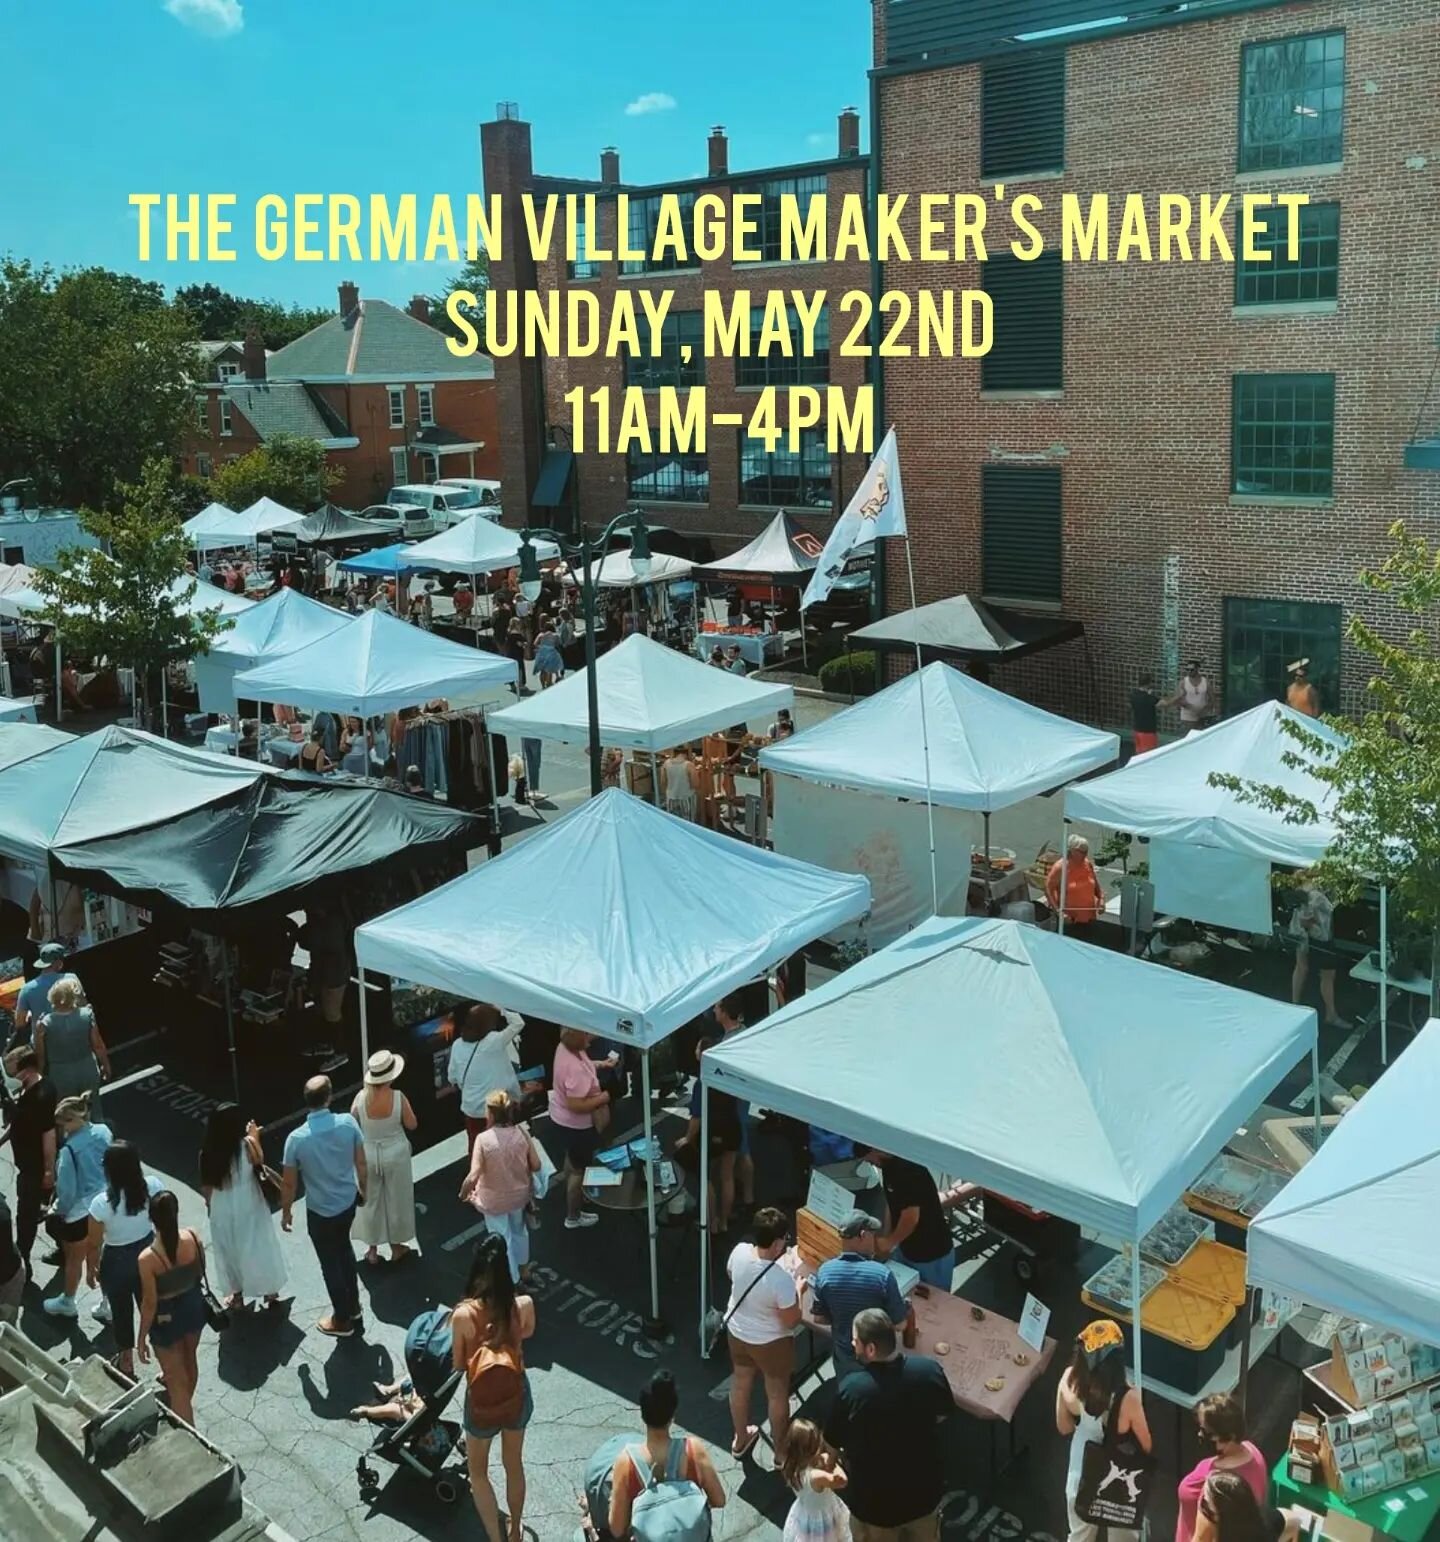 I'm very excited to have a booth this month at the German Village Maker's Market!

 @germanvillagemakersmarket

You can find the market at the corner of City Park and Thurman Ave.
There will be a wide variety of food, art, home goods, apparel, and ac